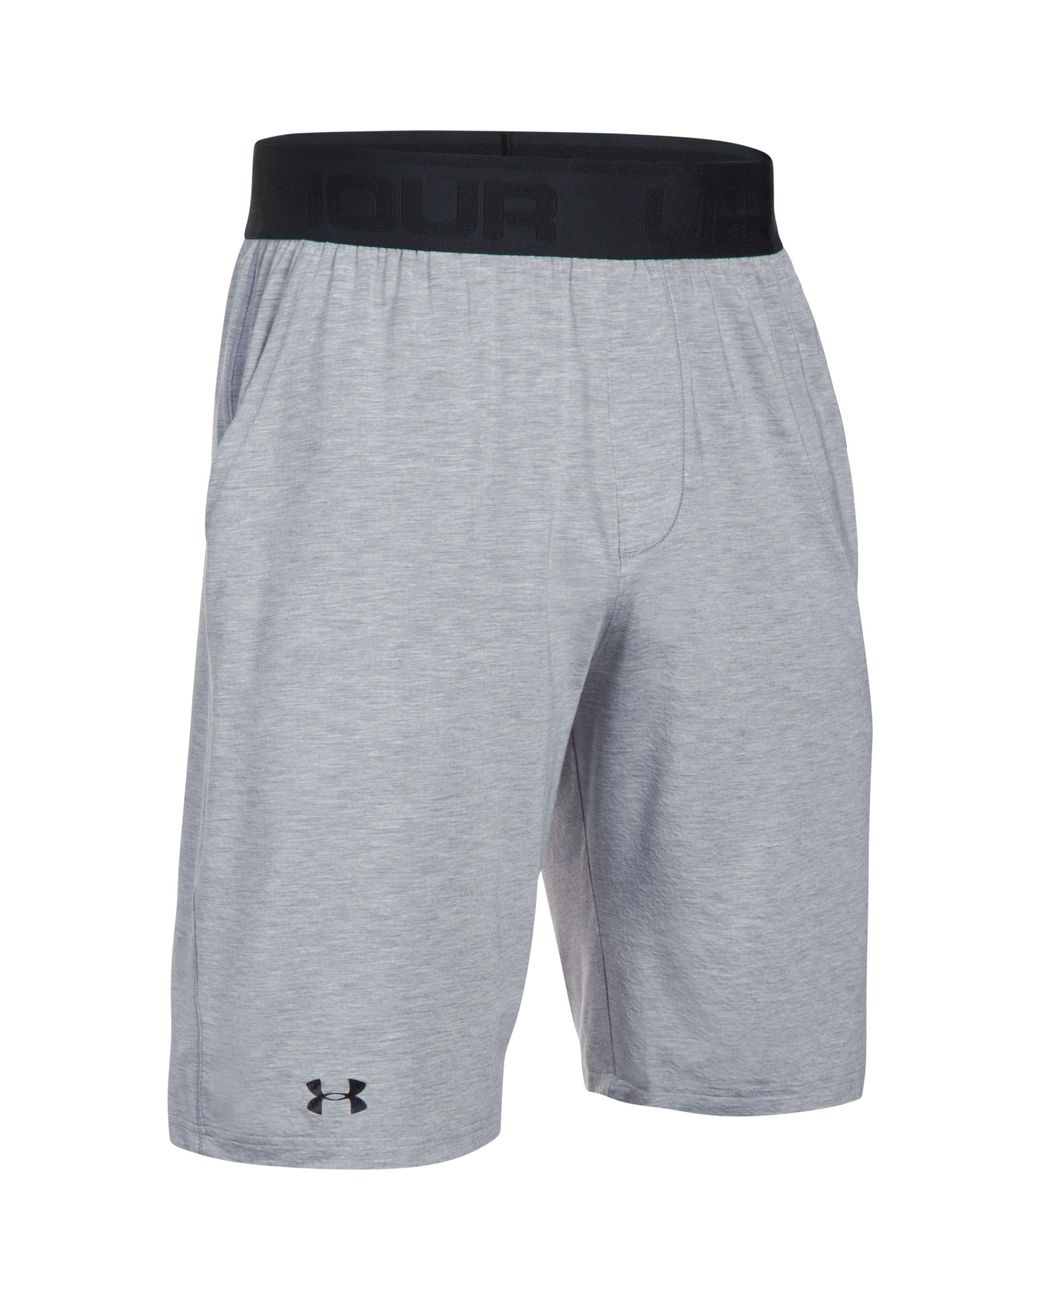 Under Armour Mens Athlete Recovery Ultra Comfort Sleepwear Shorts Pants Trousers 